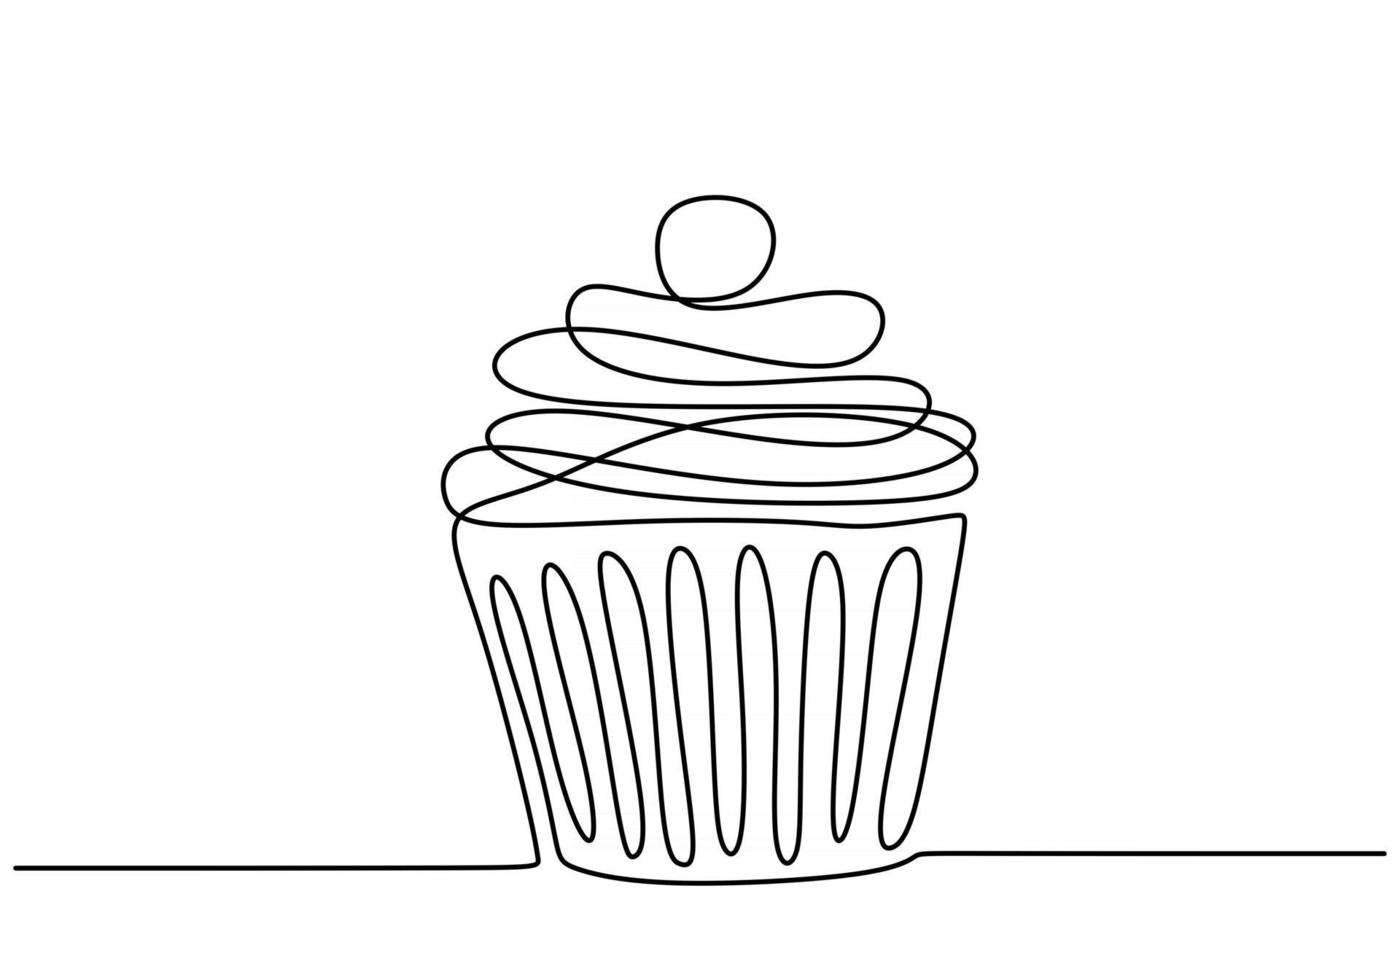 Single continuous line of cupcake. Cupcake fast food in one line style isolated on white background. vector